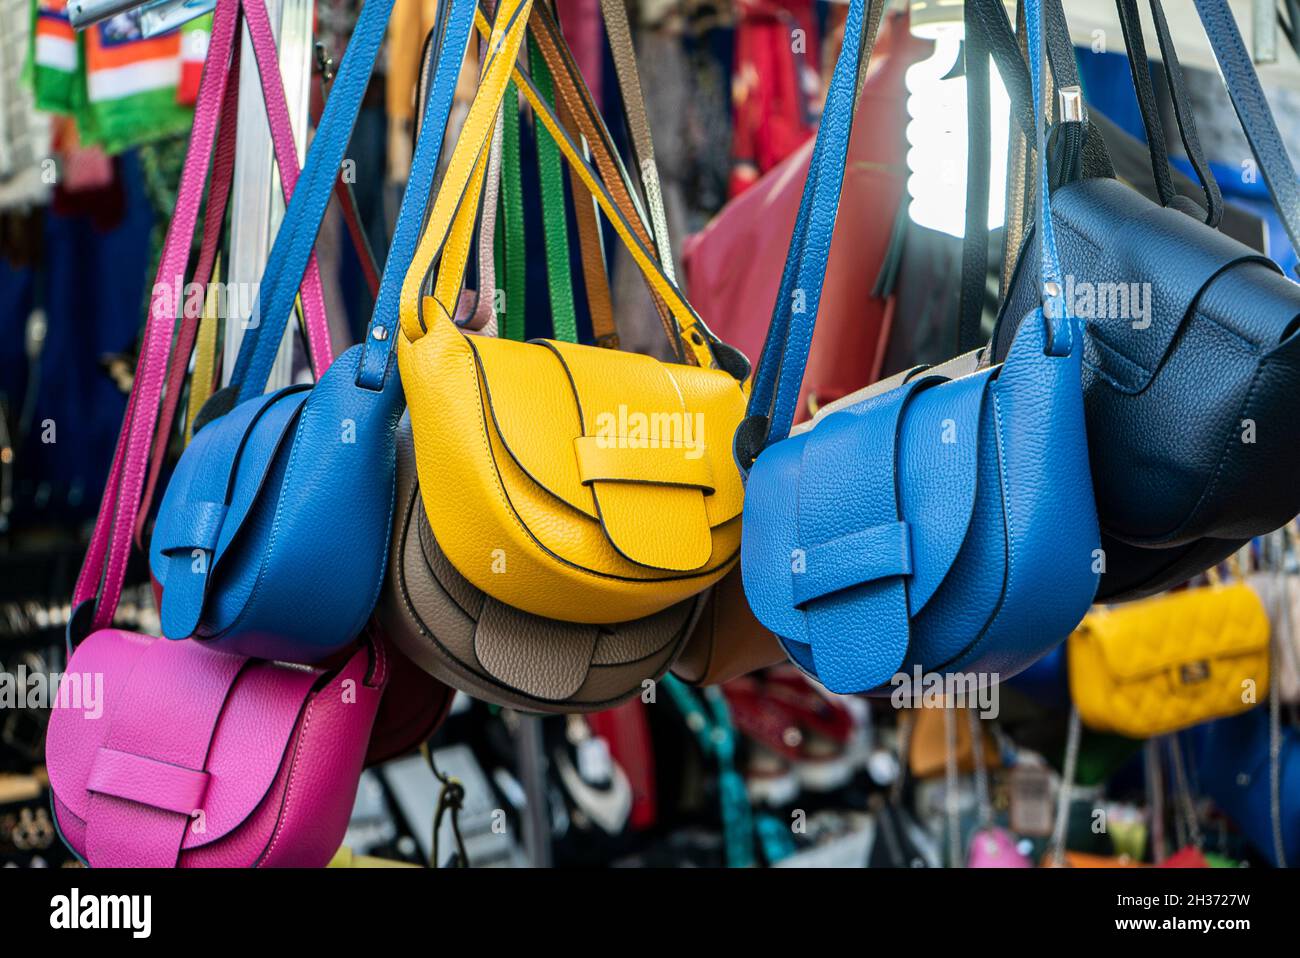 440+ Colorful Leather Handbags For Sale Stock Photos, Pictures &  Royalty-Free Images - iStock